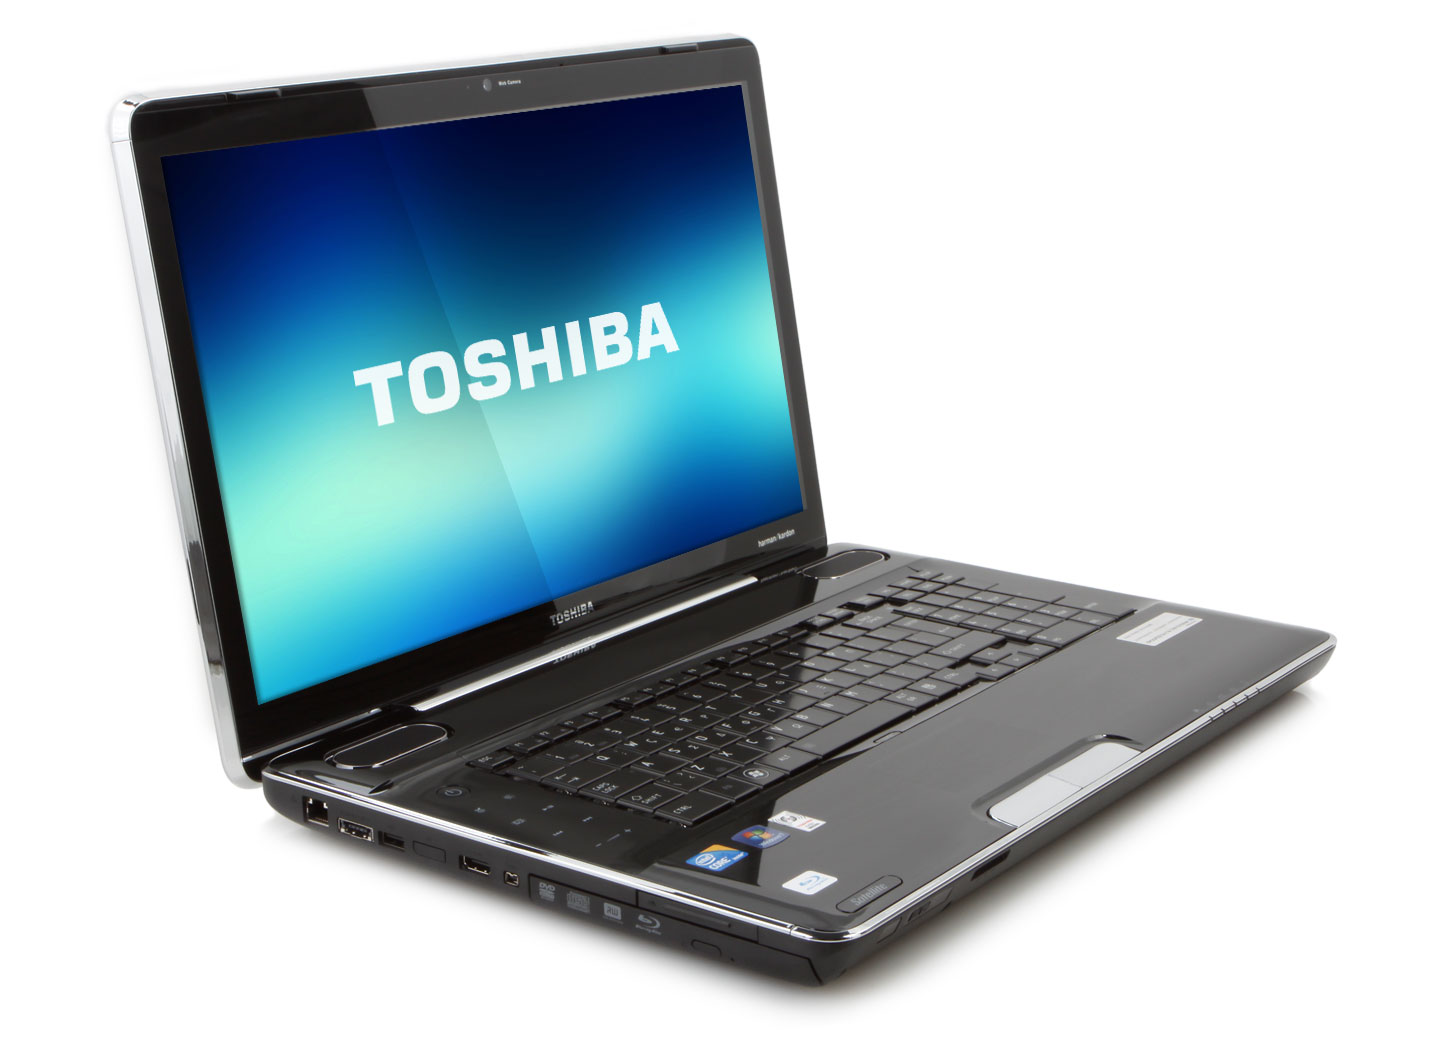 HD Wallpaper For Toshiba Laptop Uk Quotes